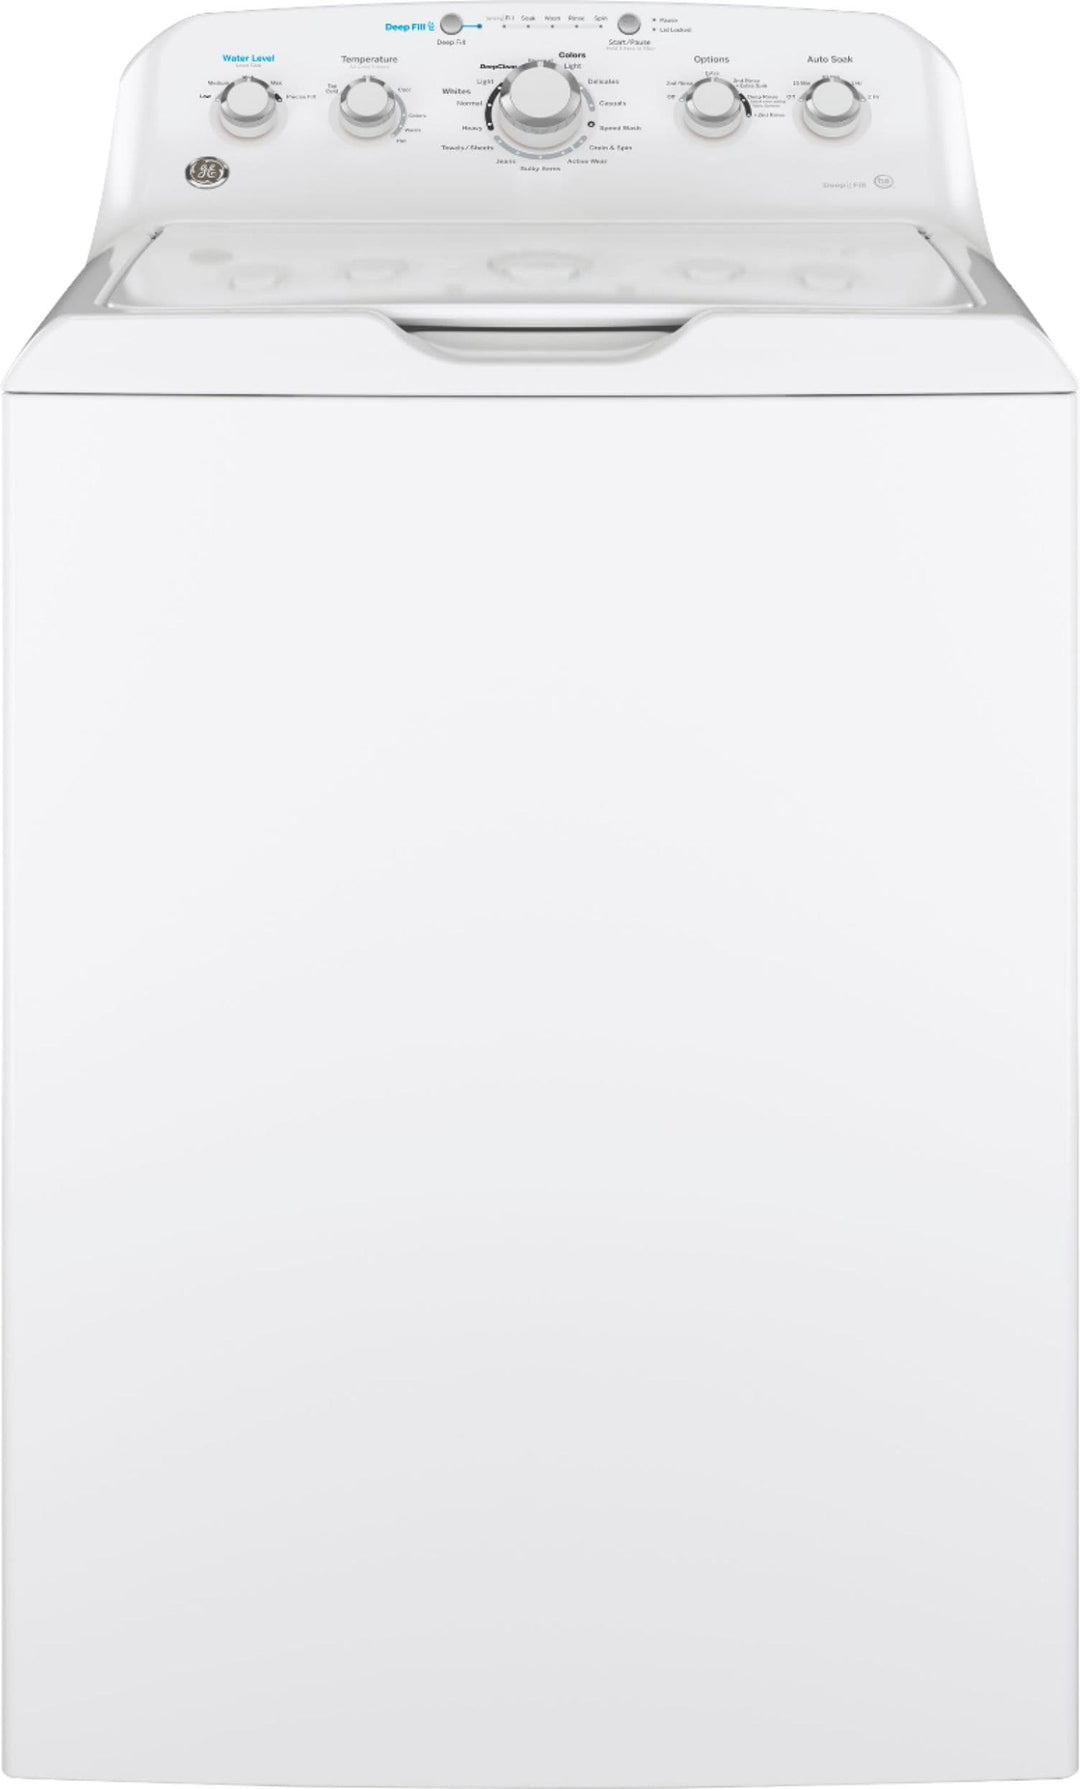 GE - 4.5 Cu. Ft. Top Load Washer with Precise Fill - White on white_0